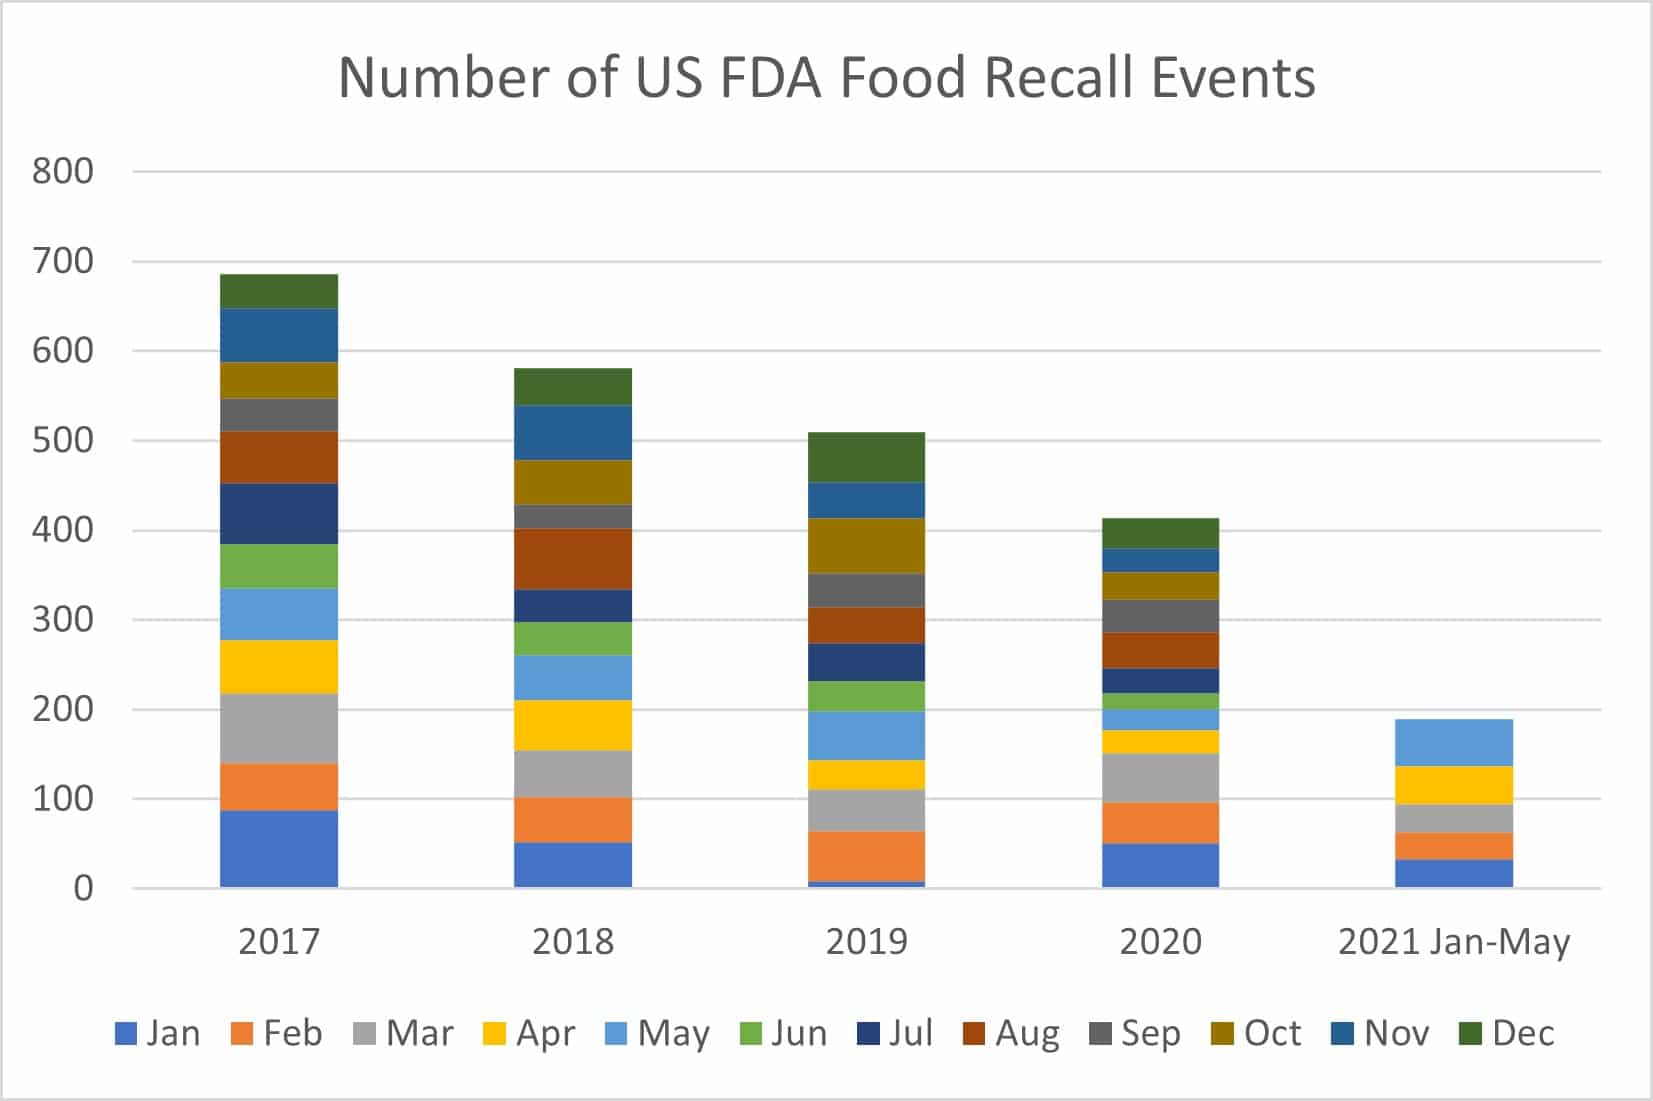 Pandemic Effect on Food Recalls What's happening in 2021 so far